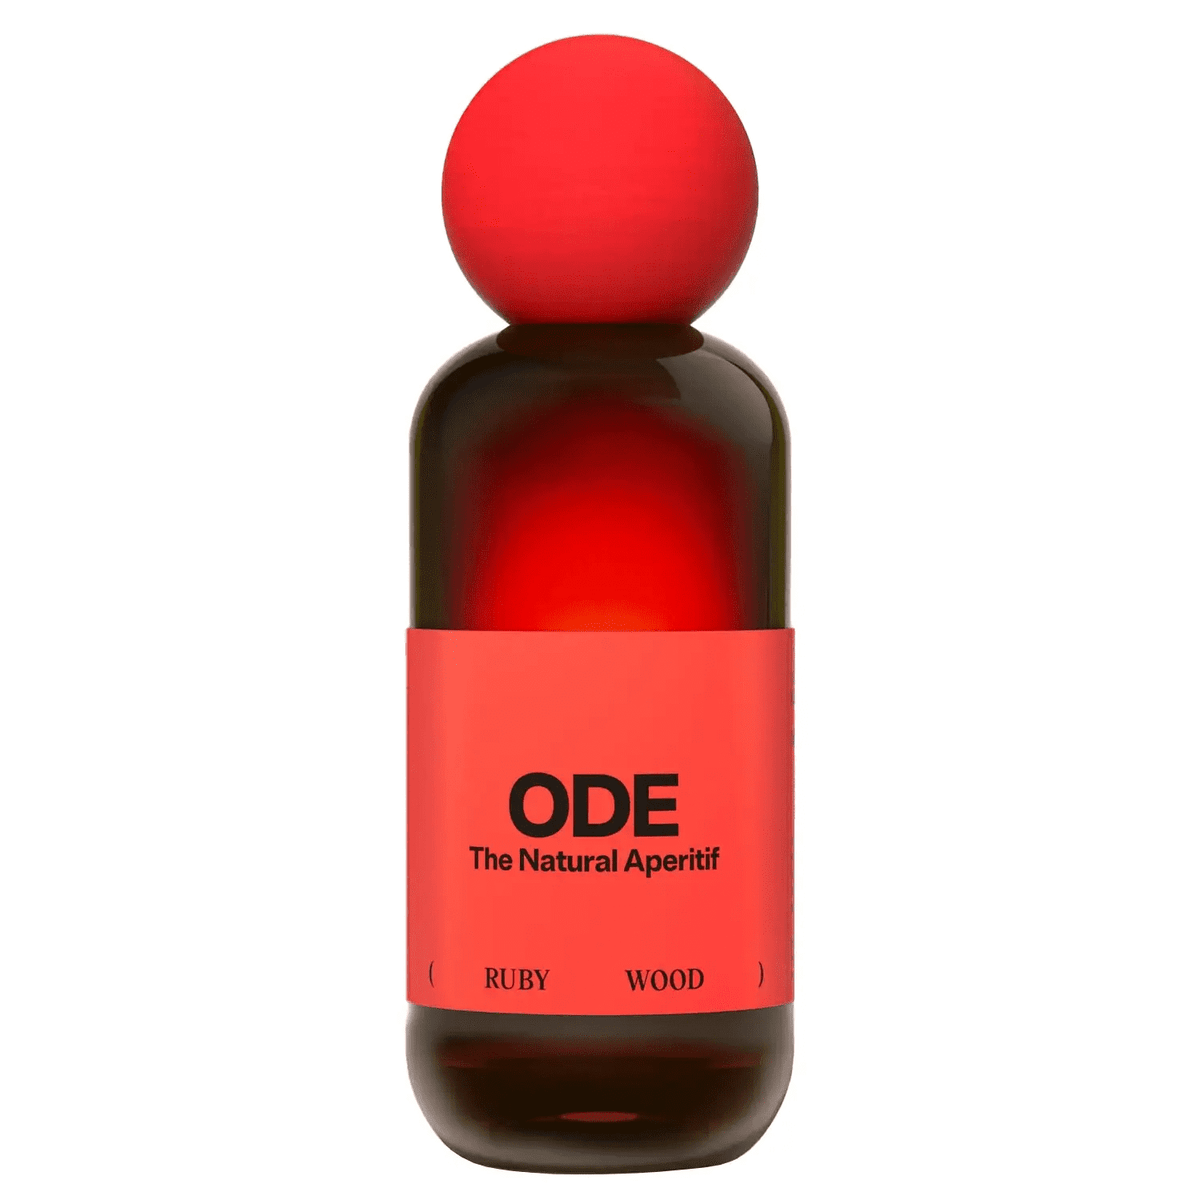 Ode Ruby Wood, Ode The Natural Aperitif